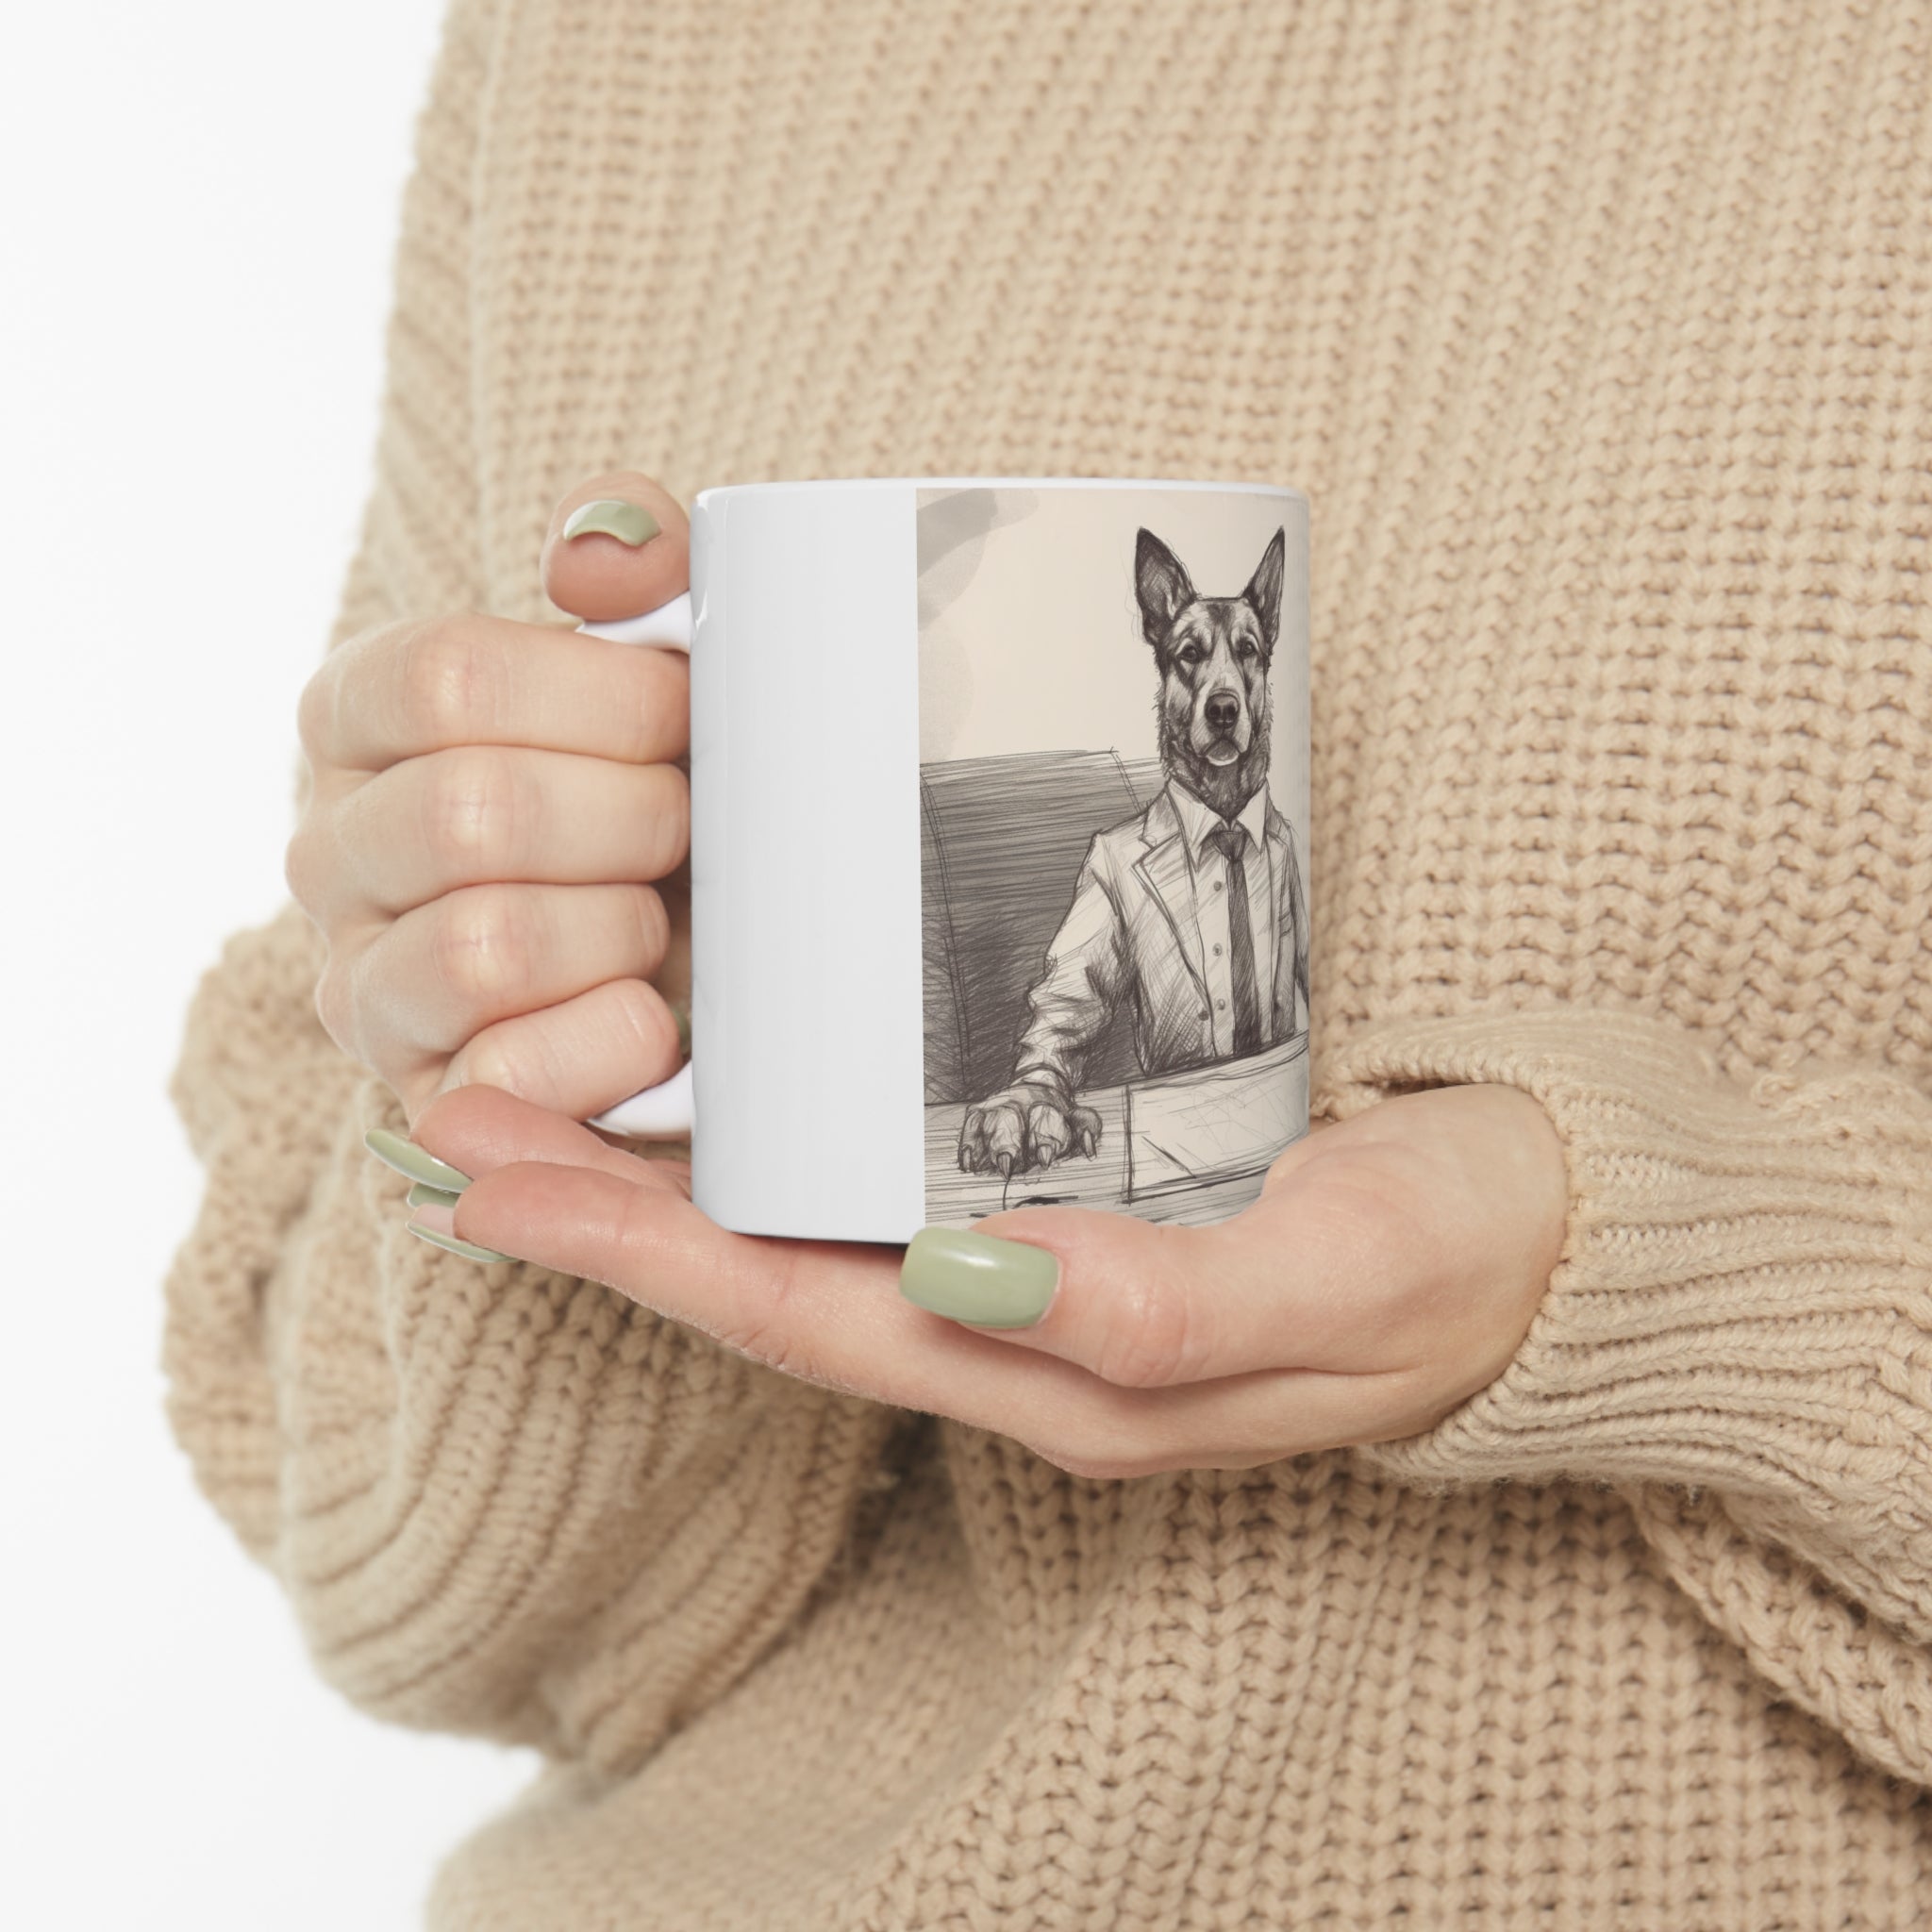 🐶 Manager Doggy Ceramic Mug 11oz - Cute Puppy Boss Coffee Cup for the Ultimate Office Manager | Adorable Desk Decor